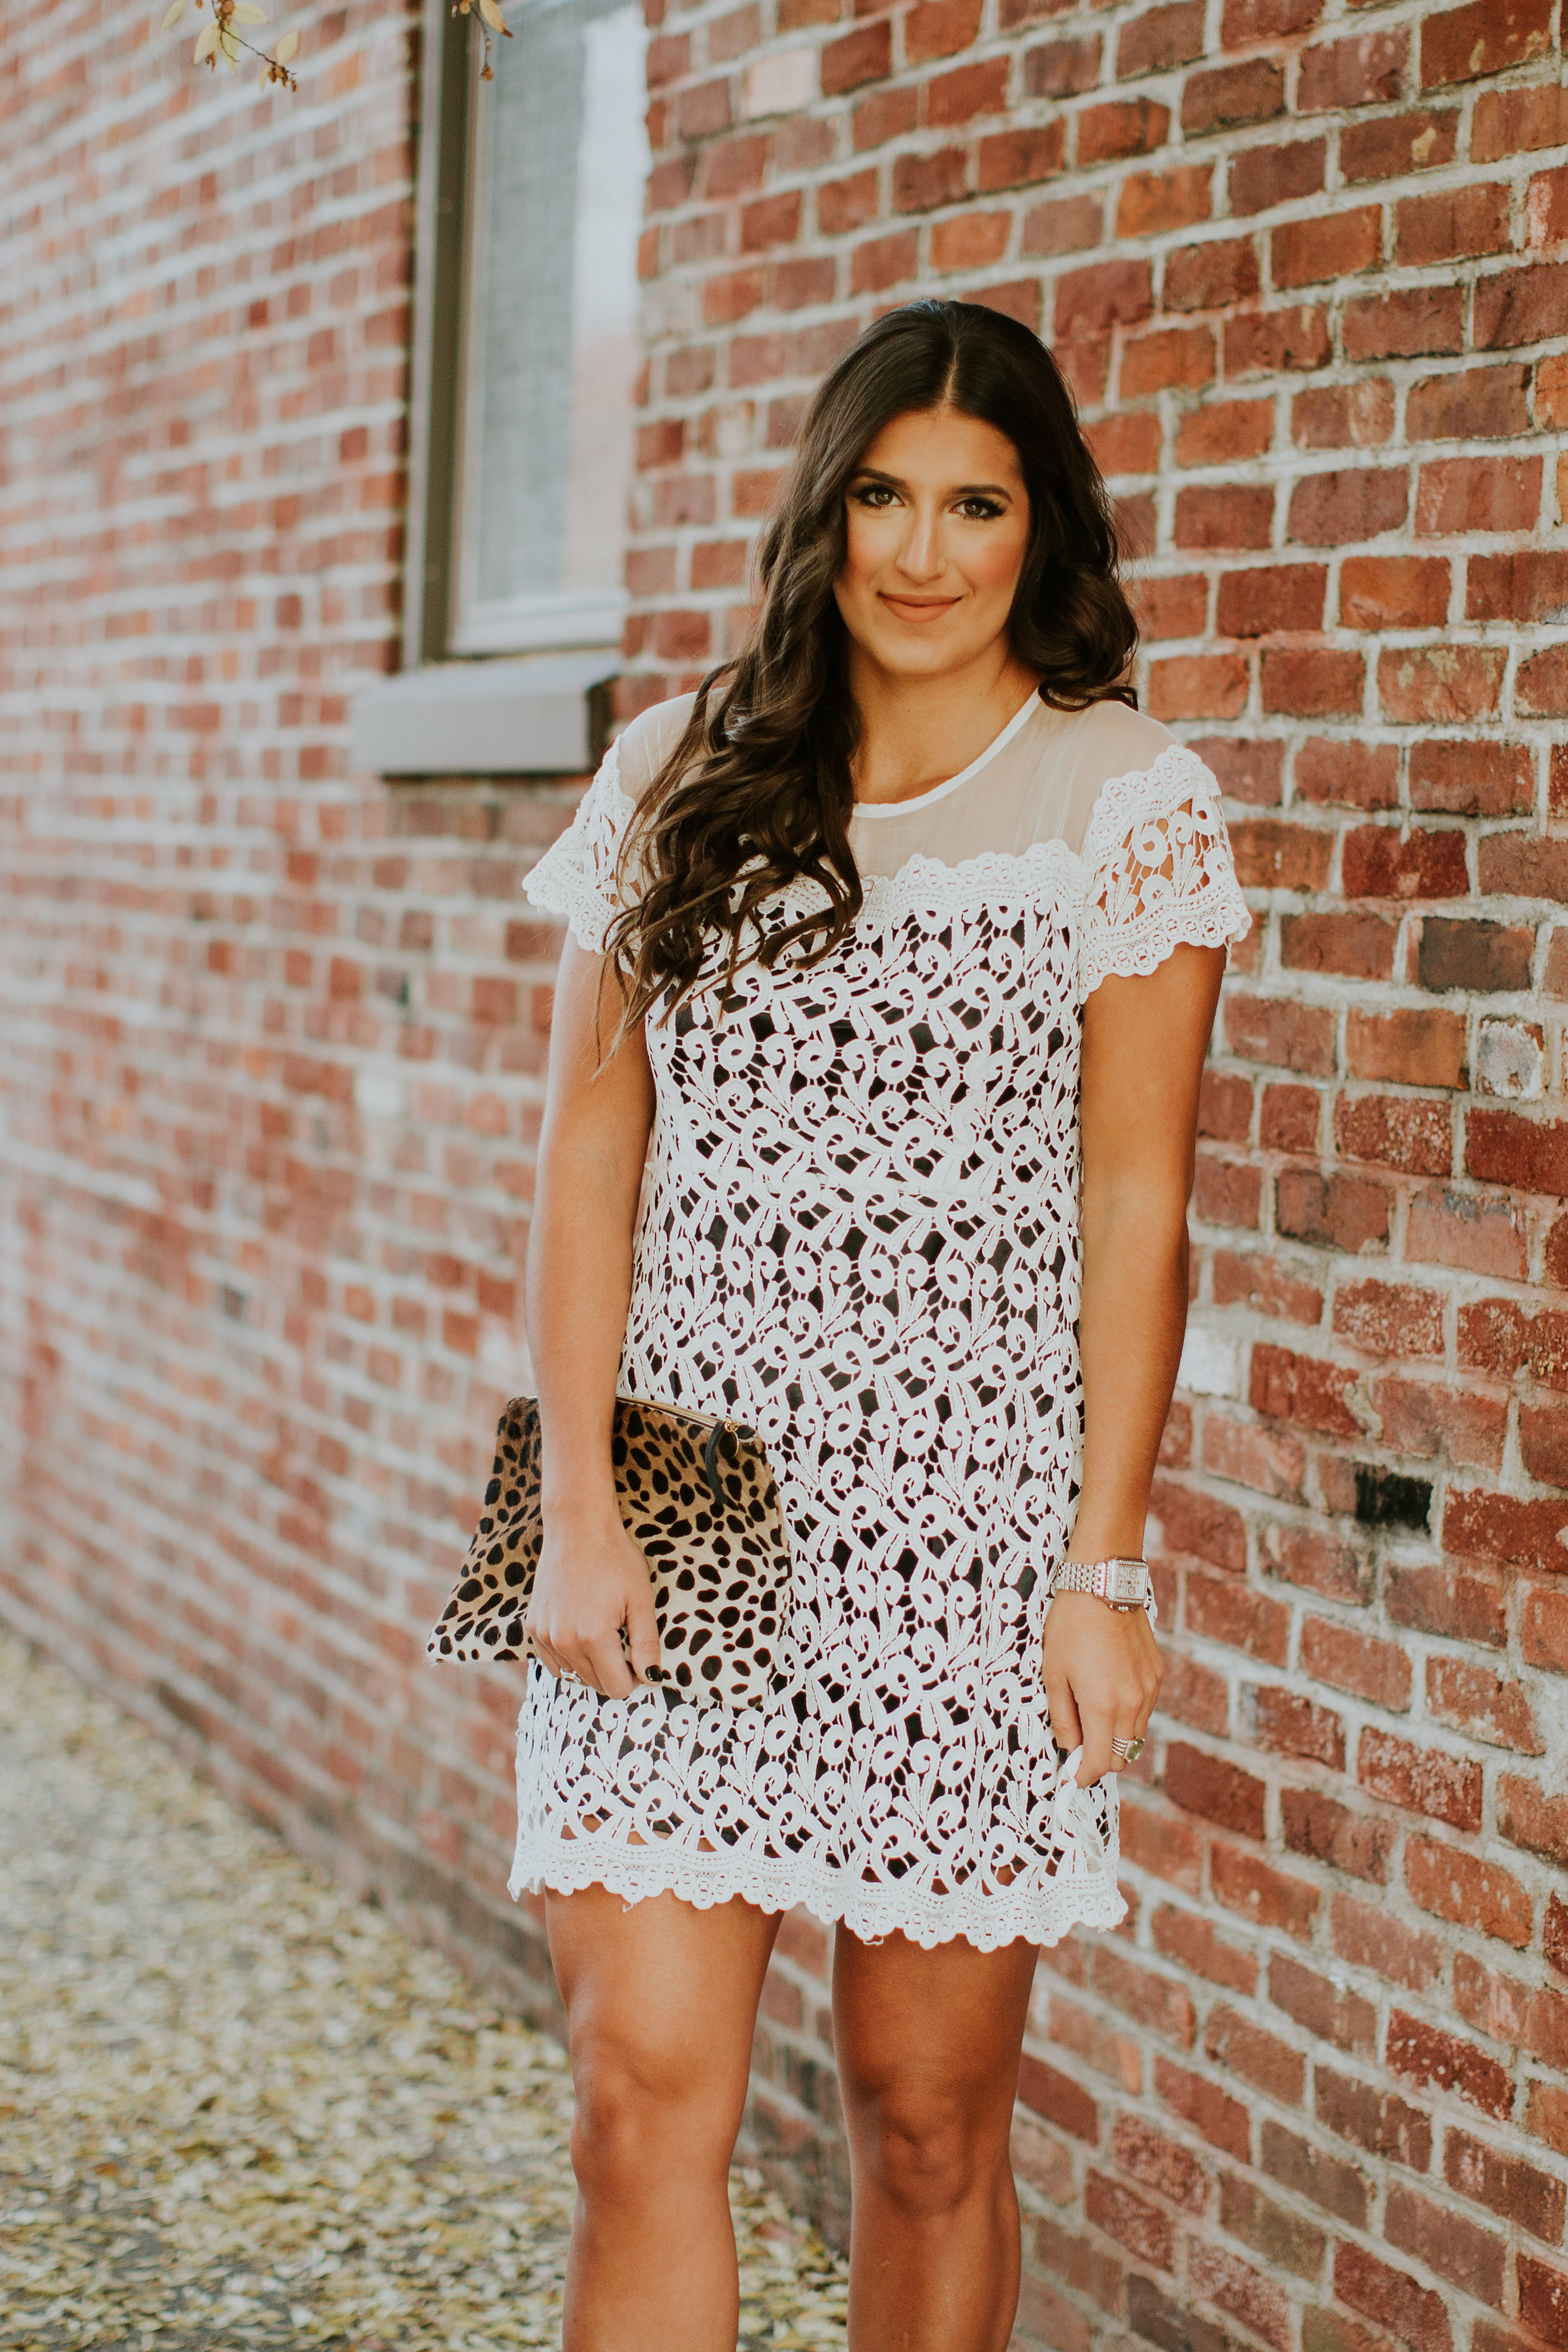 lace cap sleeve dress, chicwish dress, holiday fashion, holiday outfit, winter white, winter white dress, leopard clutch, clare v calf hair clutch, cocktail dress, cocktail party // grace wainwright a southern drawl